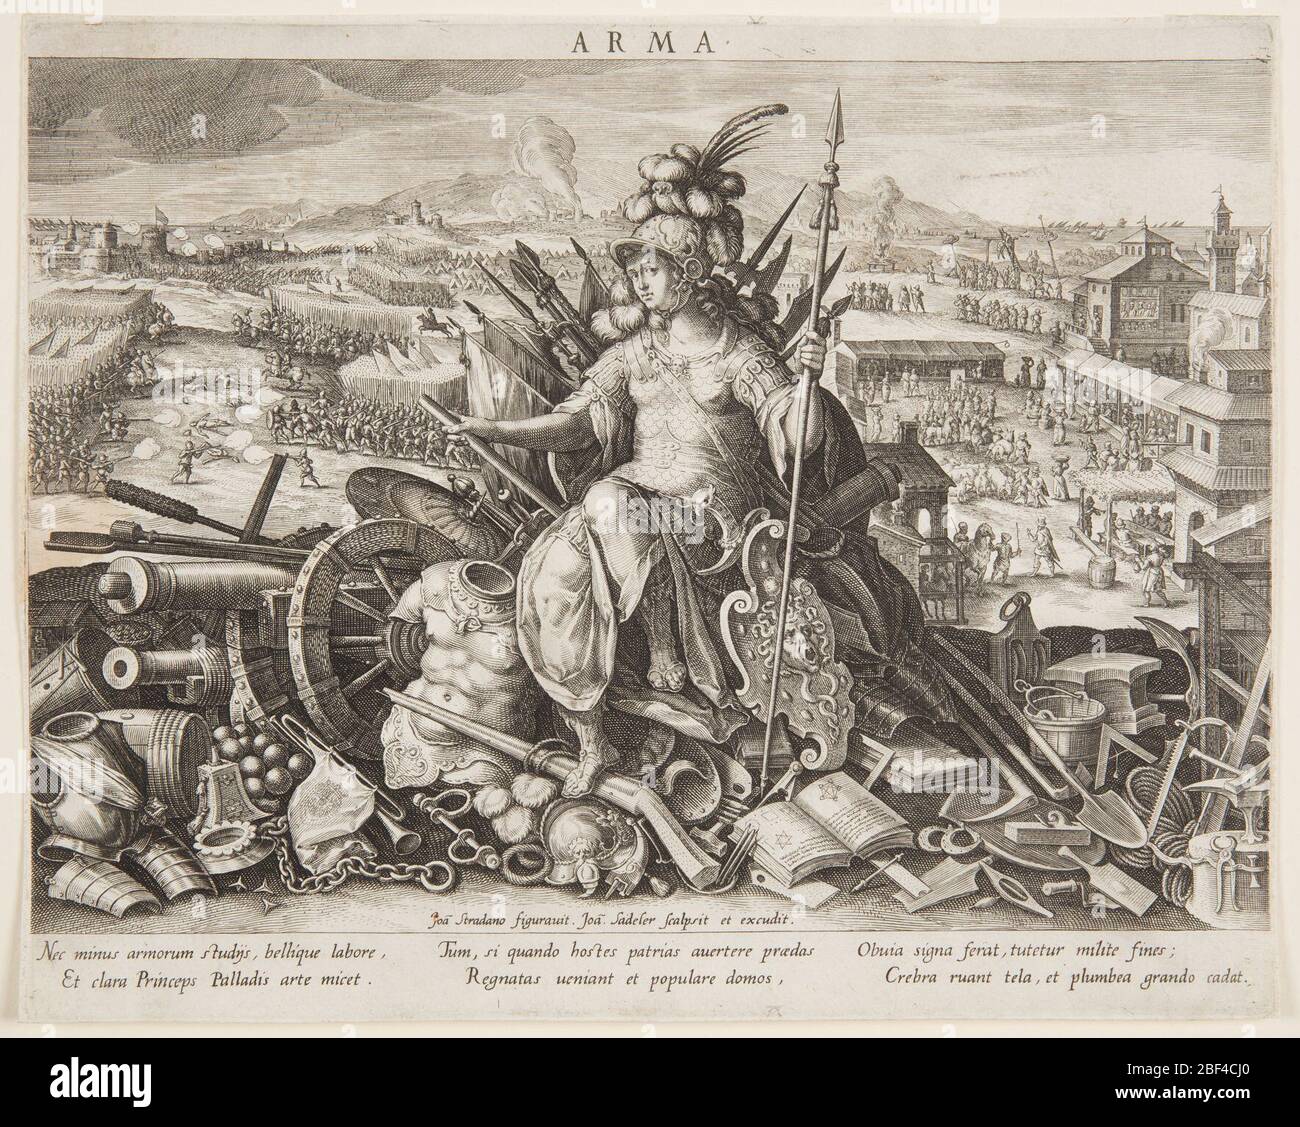 Minerva or Arma Allegory of the Art of War pl 2 in the Schema seu Speculum Principum Skills of a Prince series. In the foreground, the goddess Minerva, or Pallas Athena, clad in armour with the Medusa shield, is seated on a heap of objects associated with war, including a cannon, and a military treatise and instruments such as a drum and trumpets; to left, two armies en Stock Photo